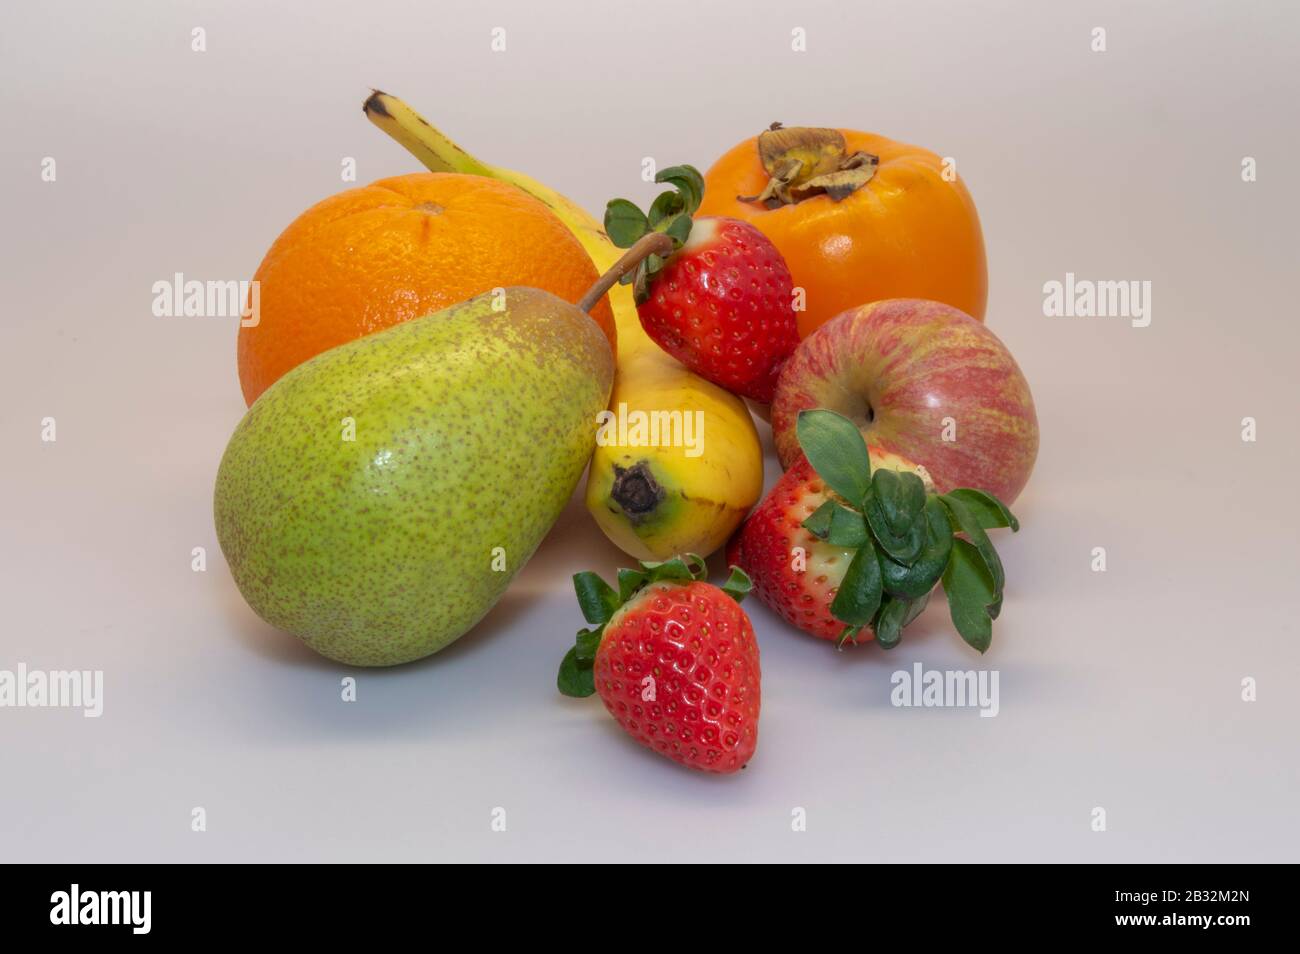 Strawberry, Pear Rock, Banana, Apple, Orange, Persimmon. Varied fruit essential for a healthy and balanced diet. Stock Photo